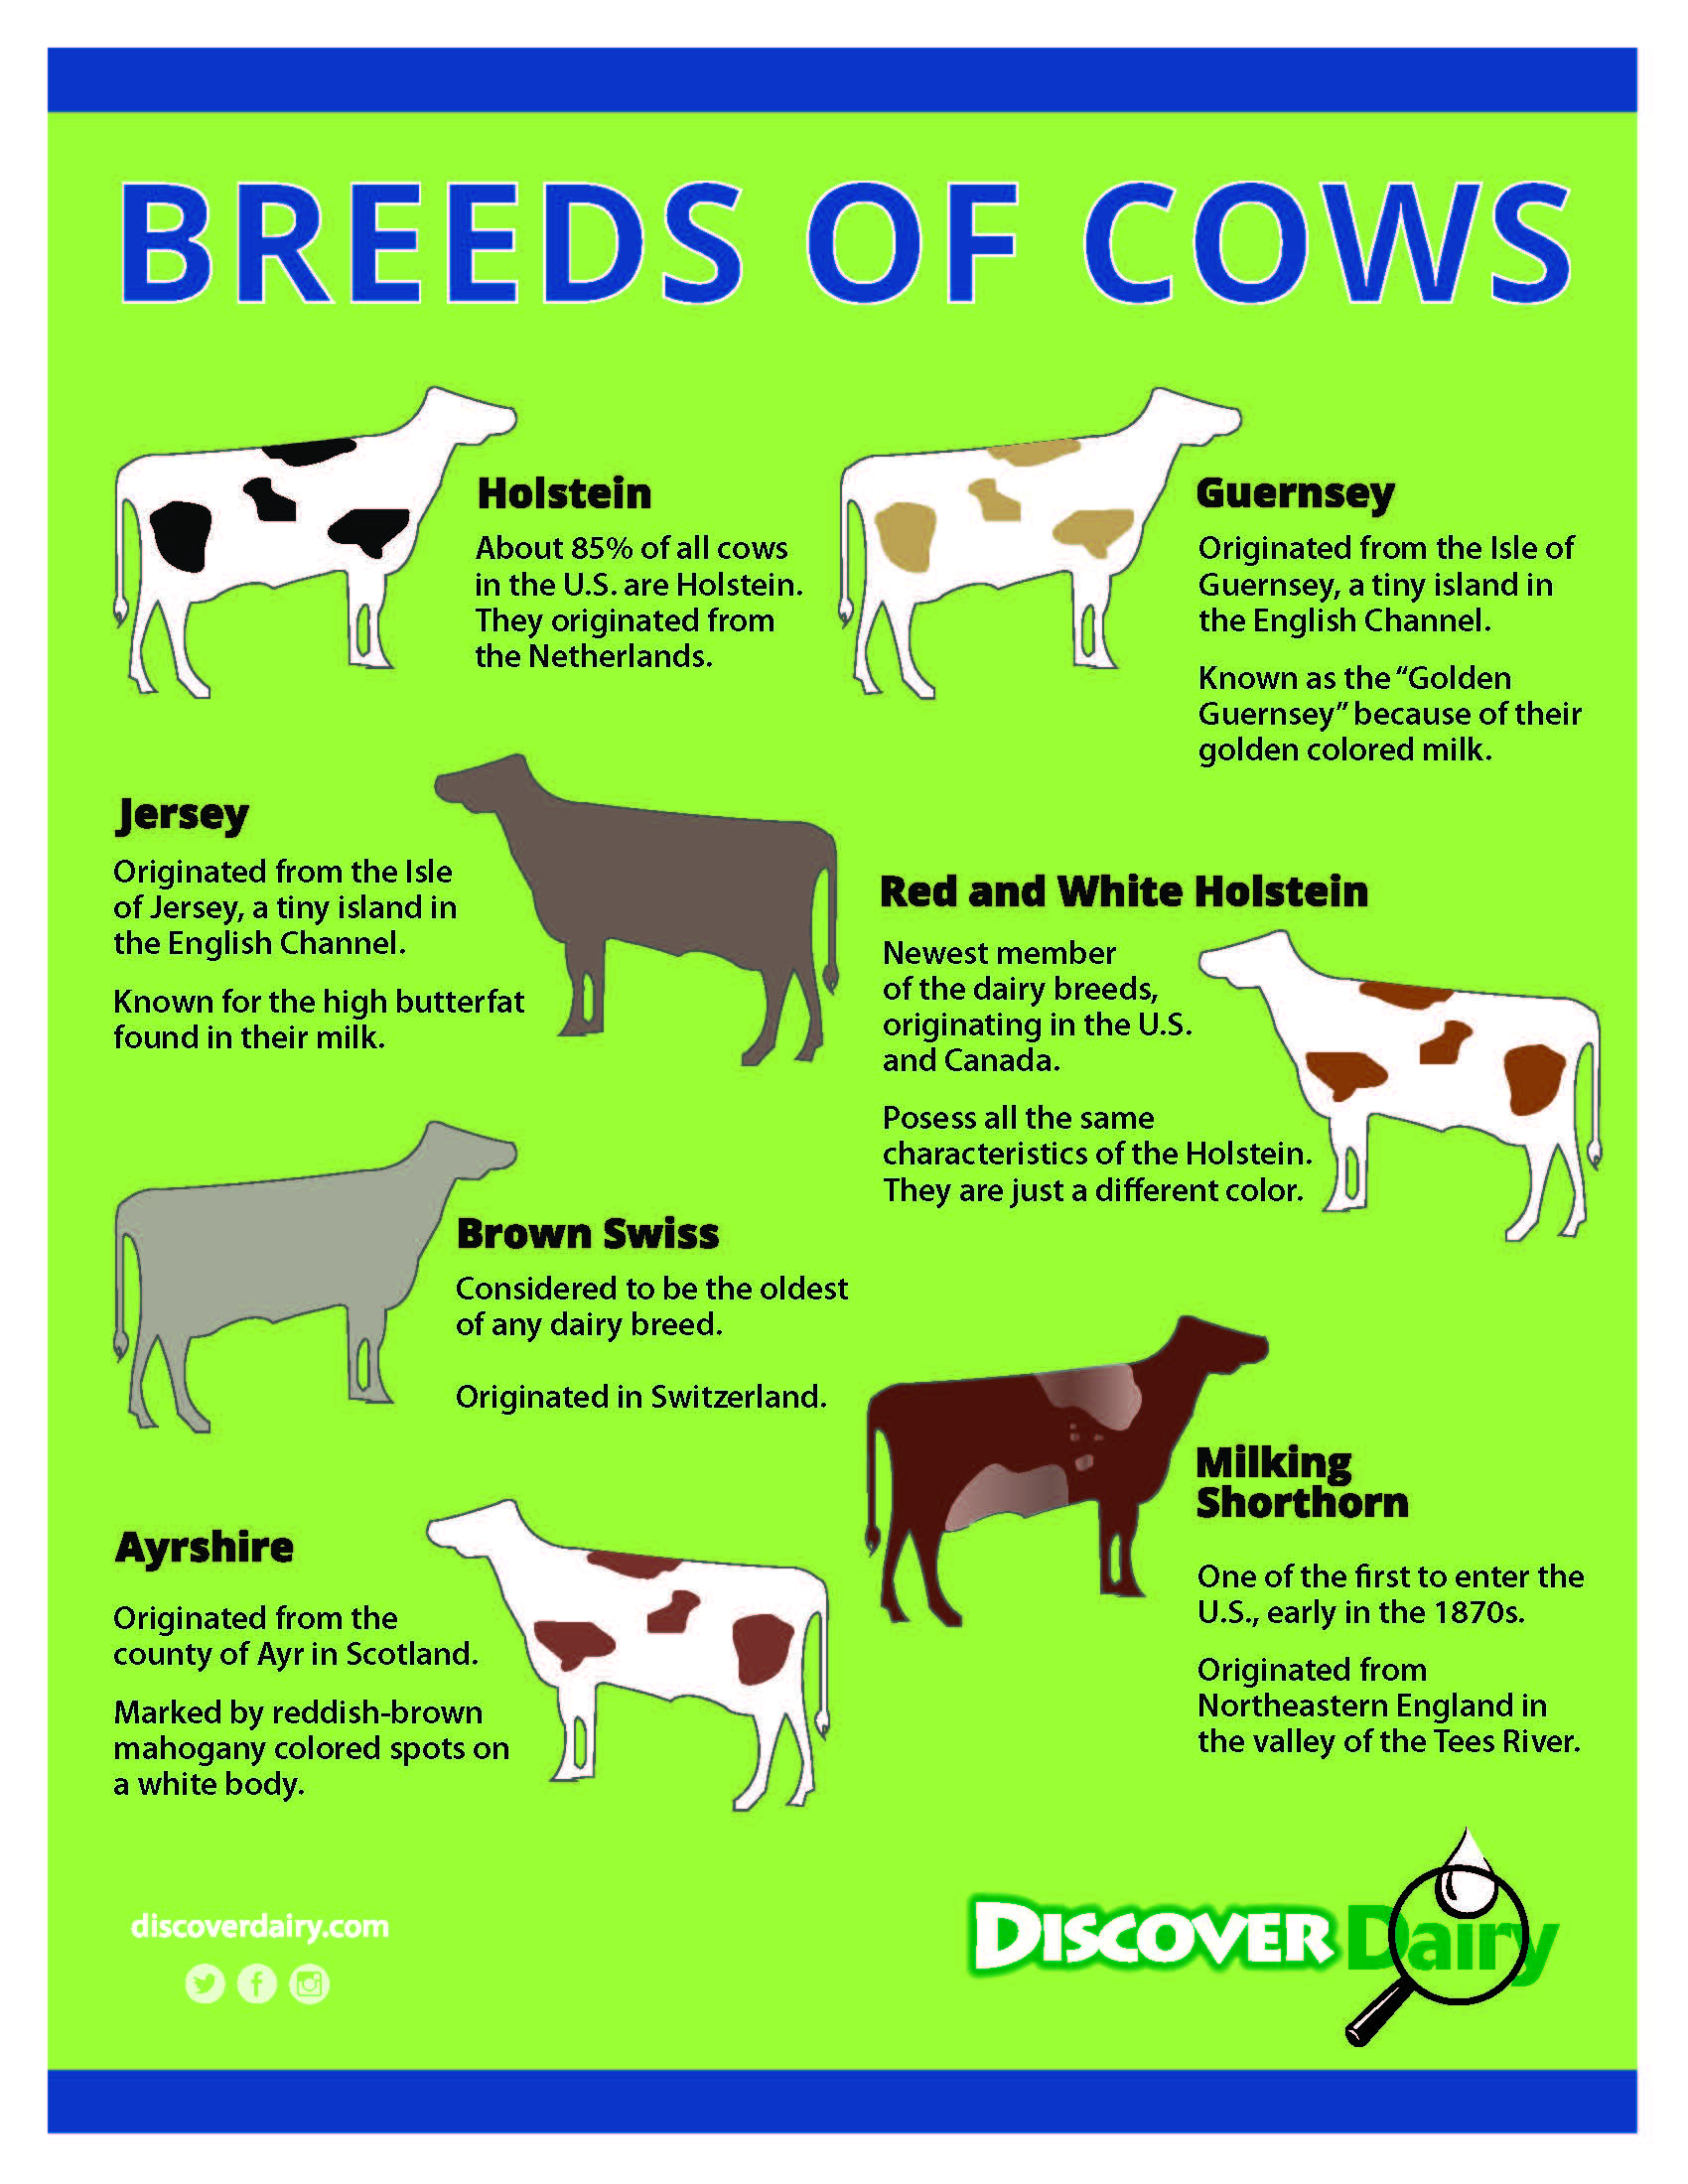 Different Types Of Cows Breeds